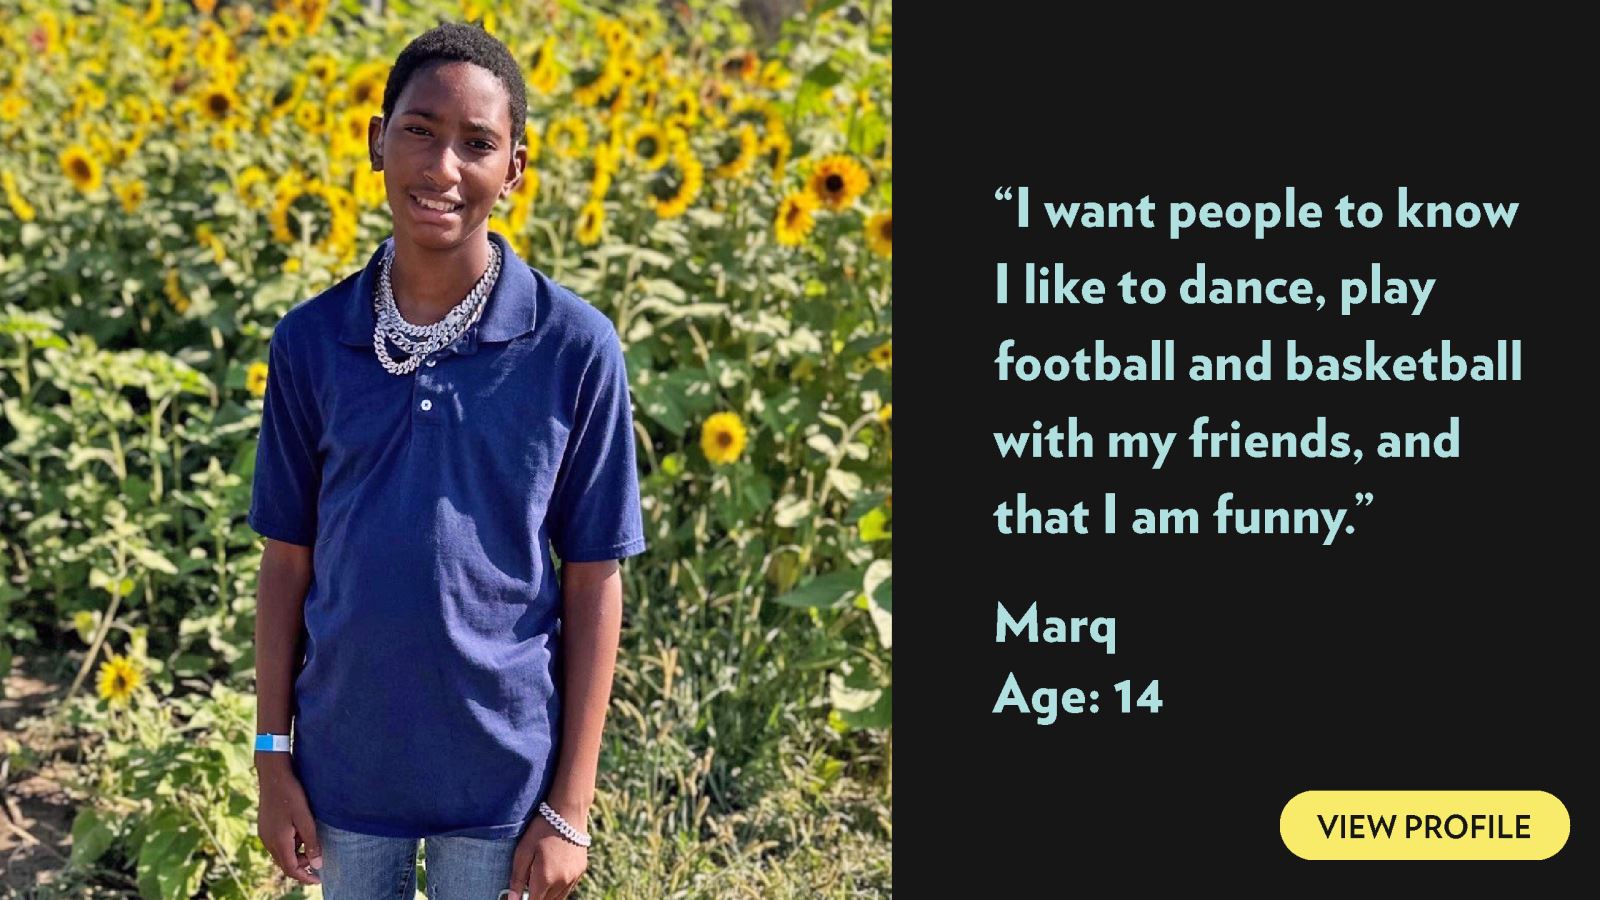 I want people to know I like to dance, play football and basketball with my friends, and that I am funny. Marq, age 14. View profile.